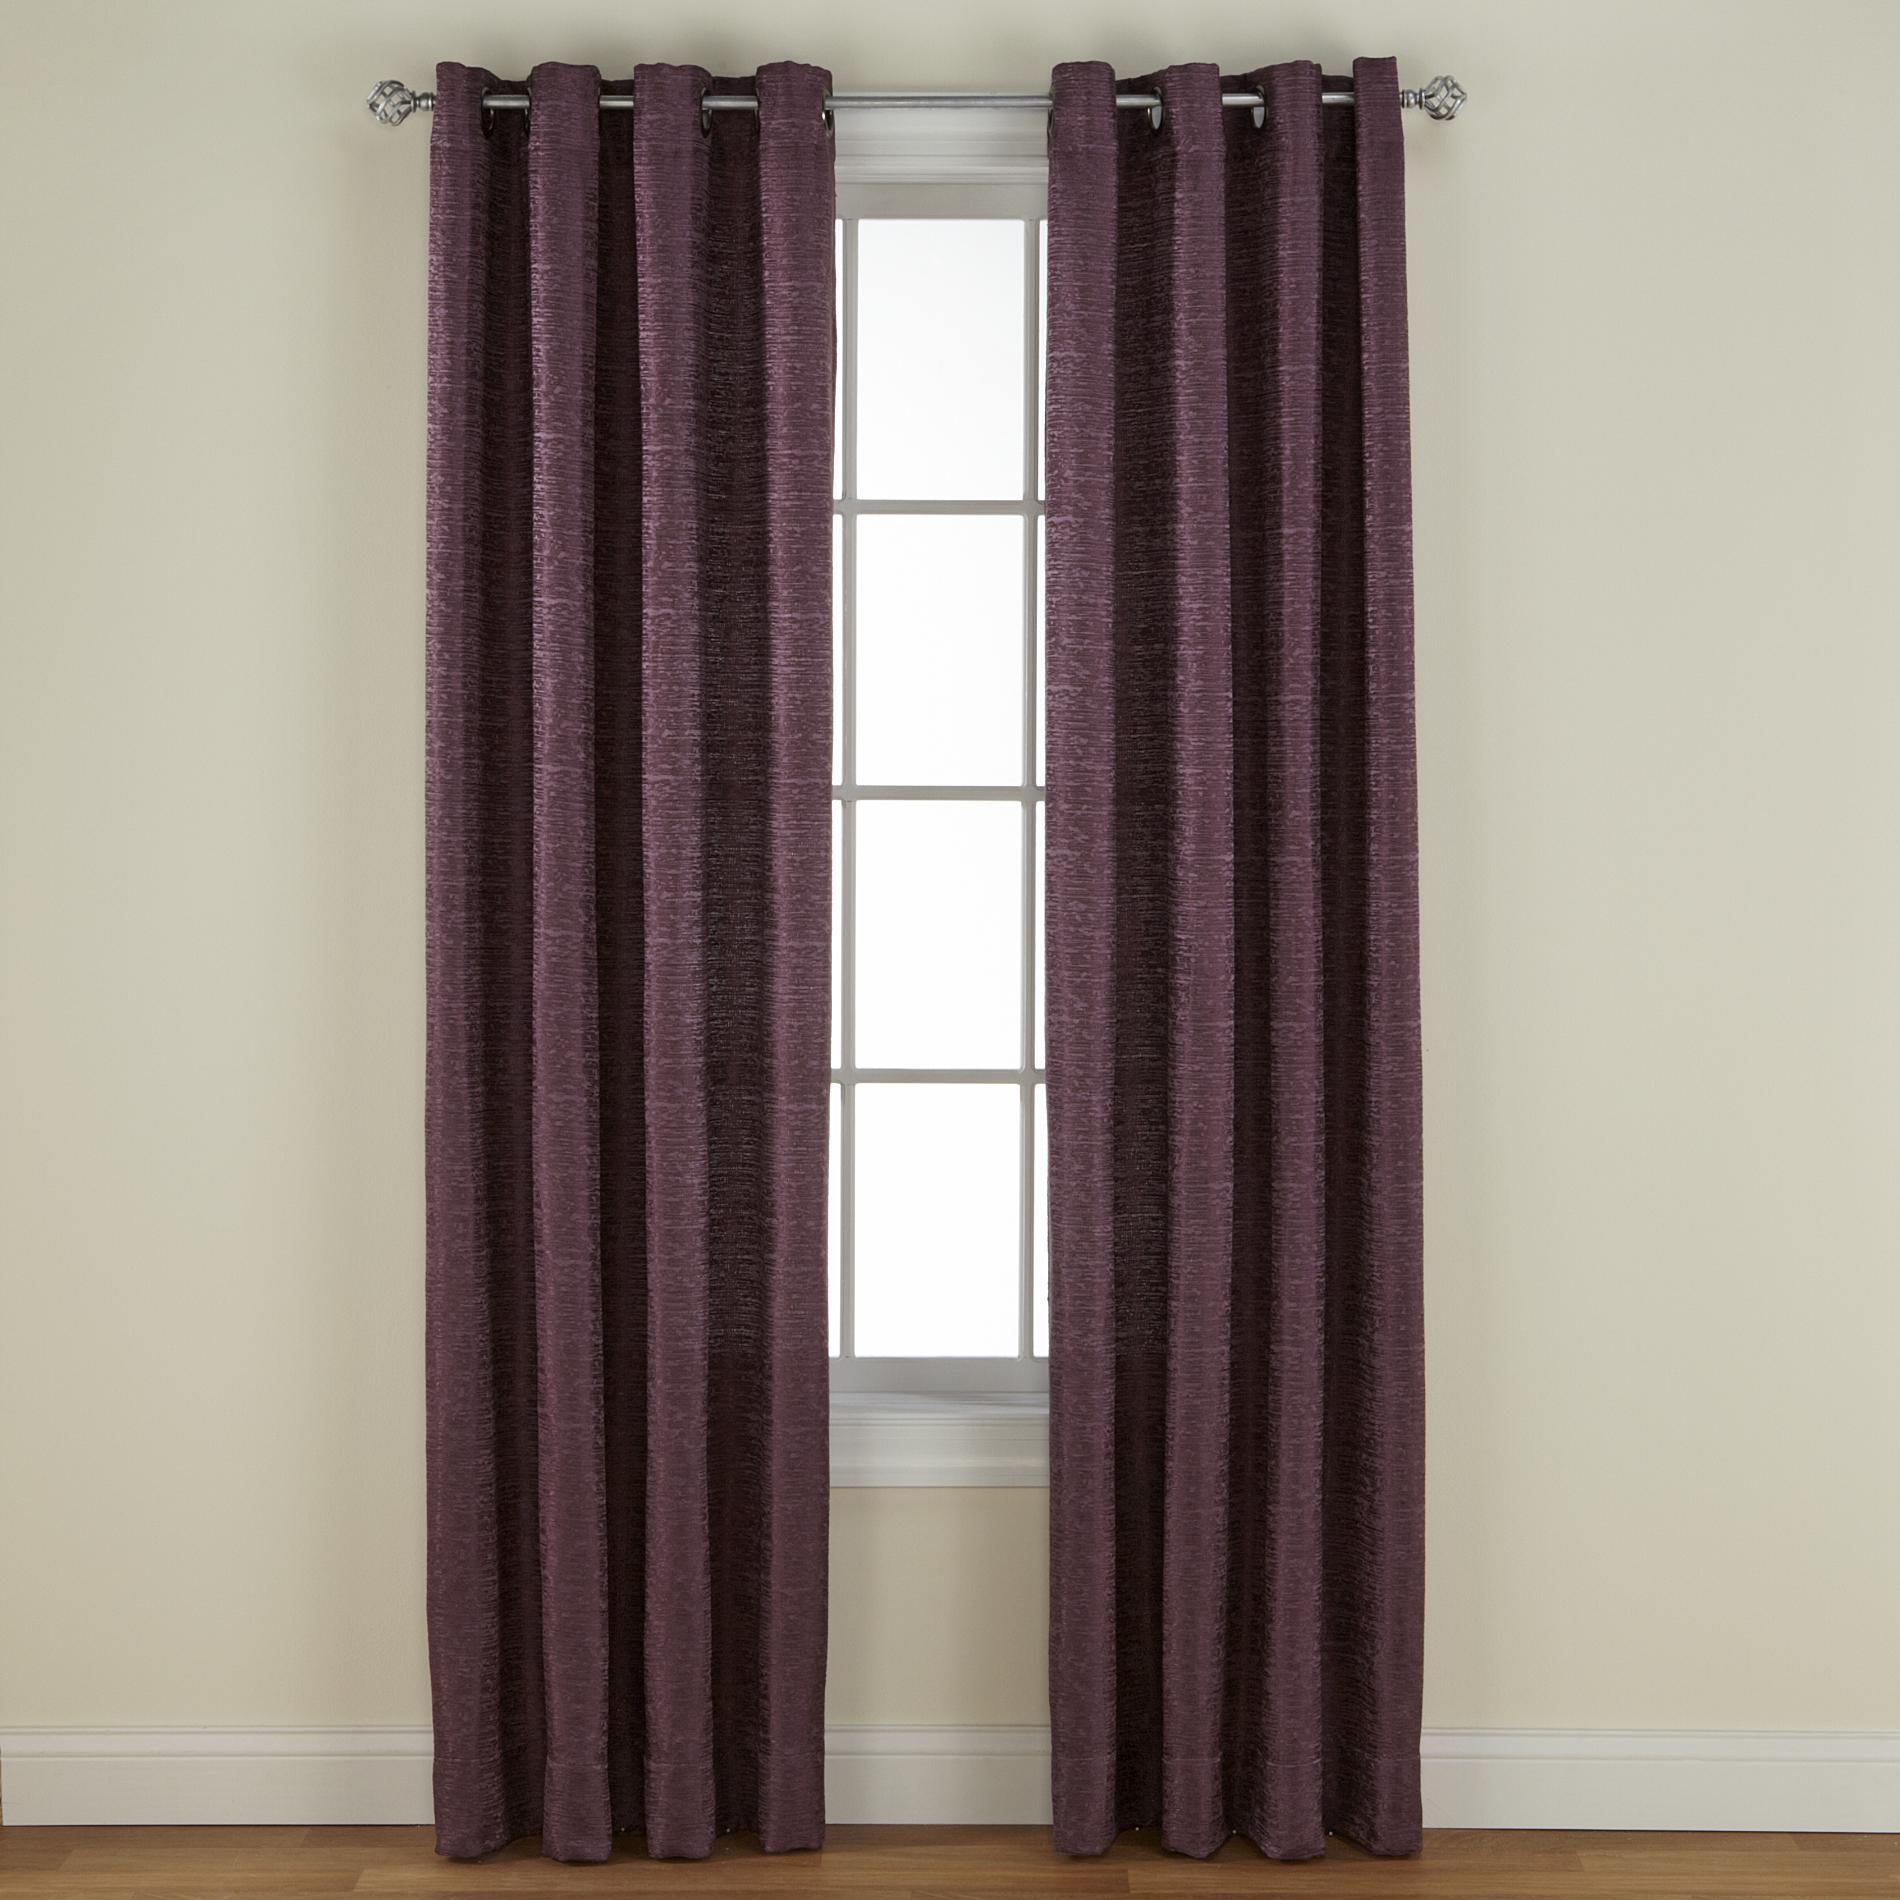 UPC 678298176587 product image for Regal Home Montclair Grommet Curtain Panel - REGAL HOME COLLECTIONS INC. | upcitemdb.com